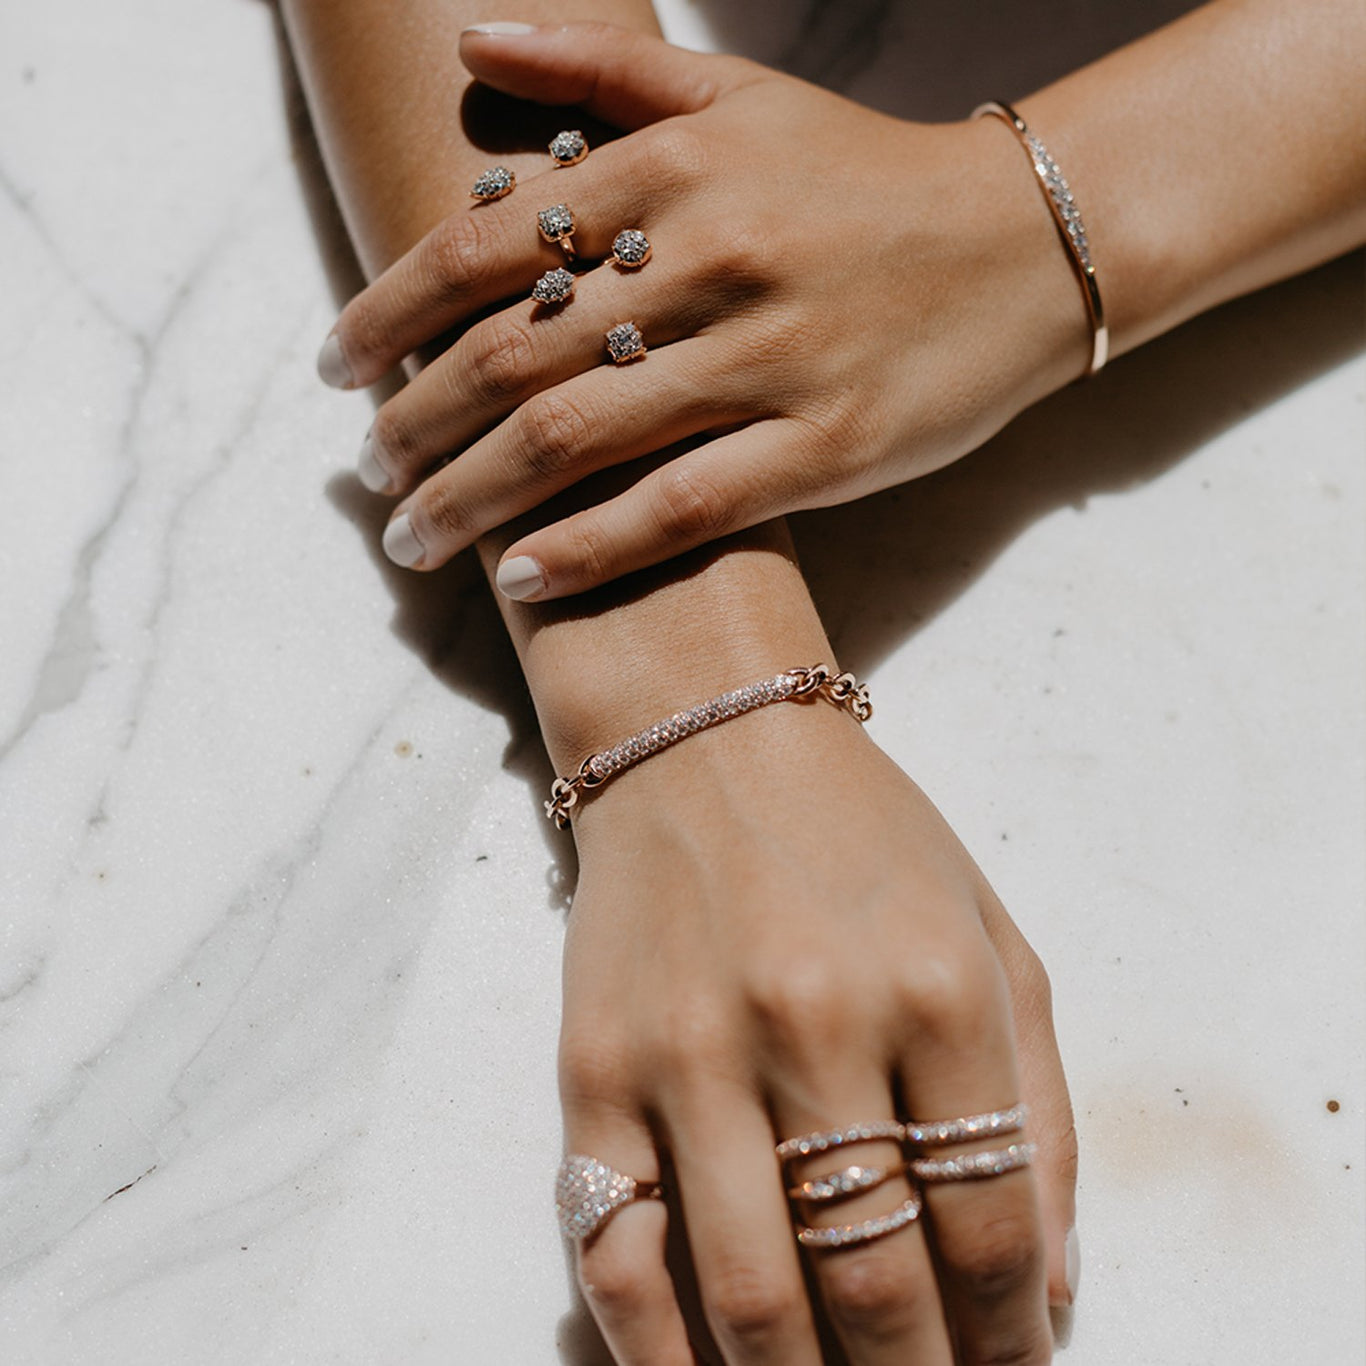 Pantheon Bracelet shown in Rose Gold next to the Throne Rings on the Left hand.